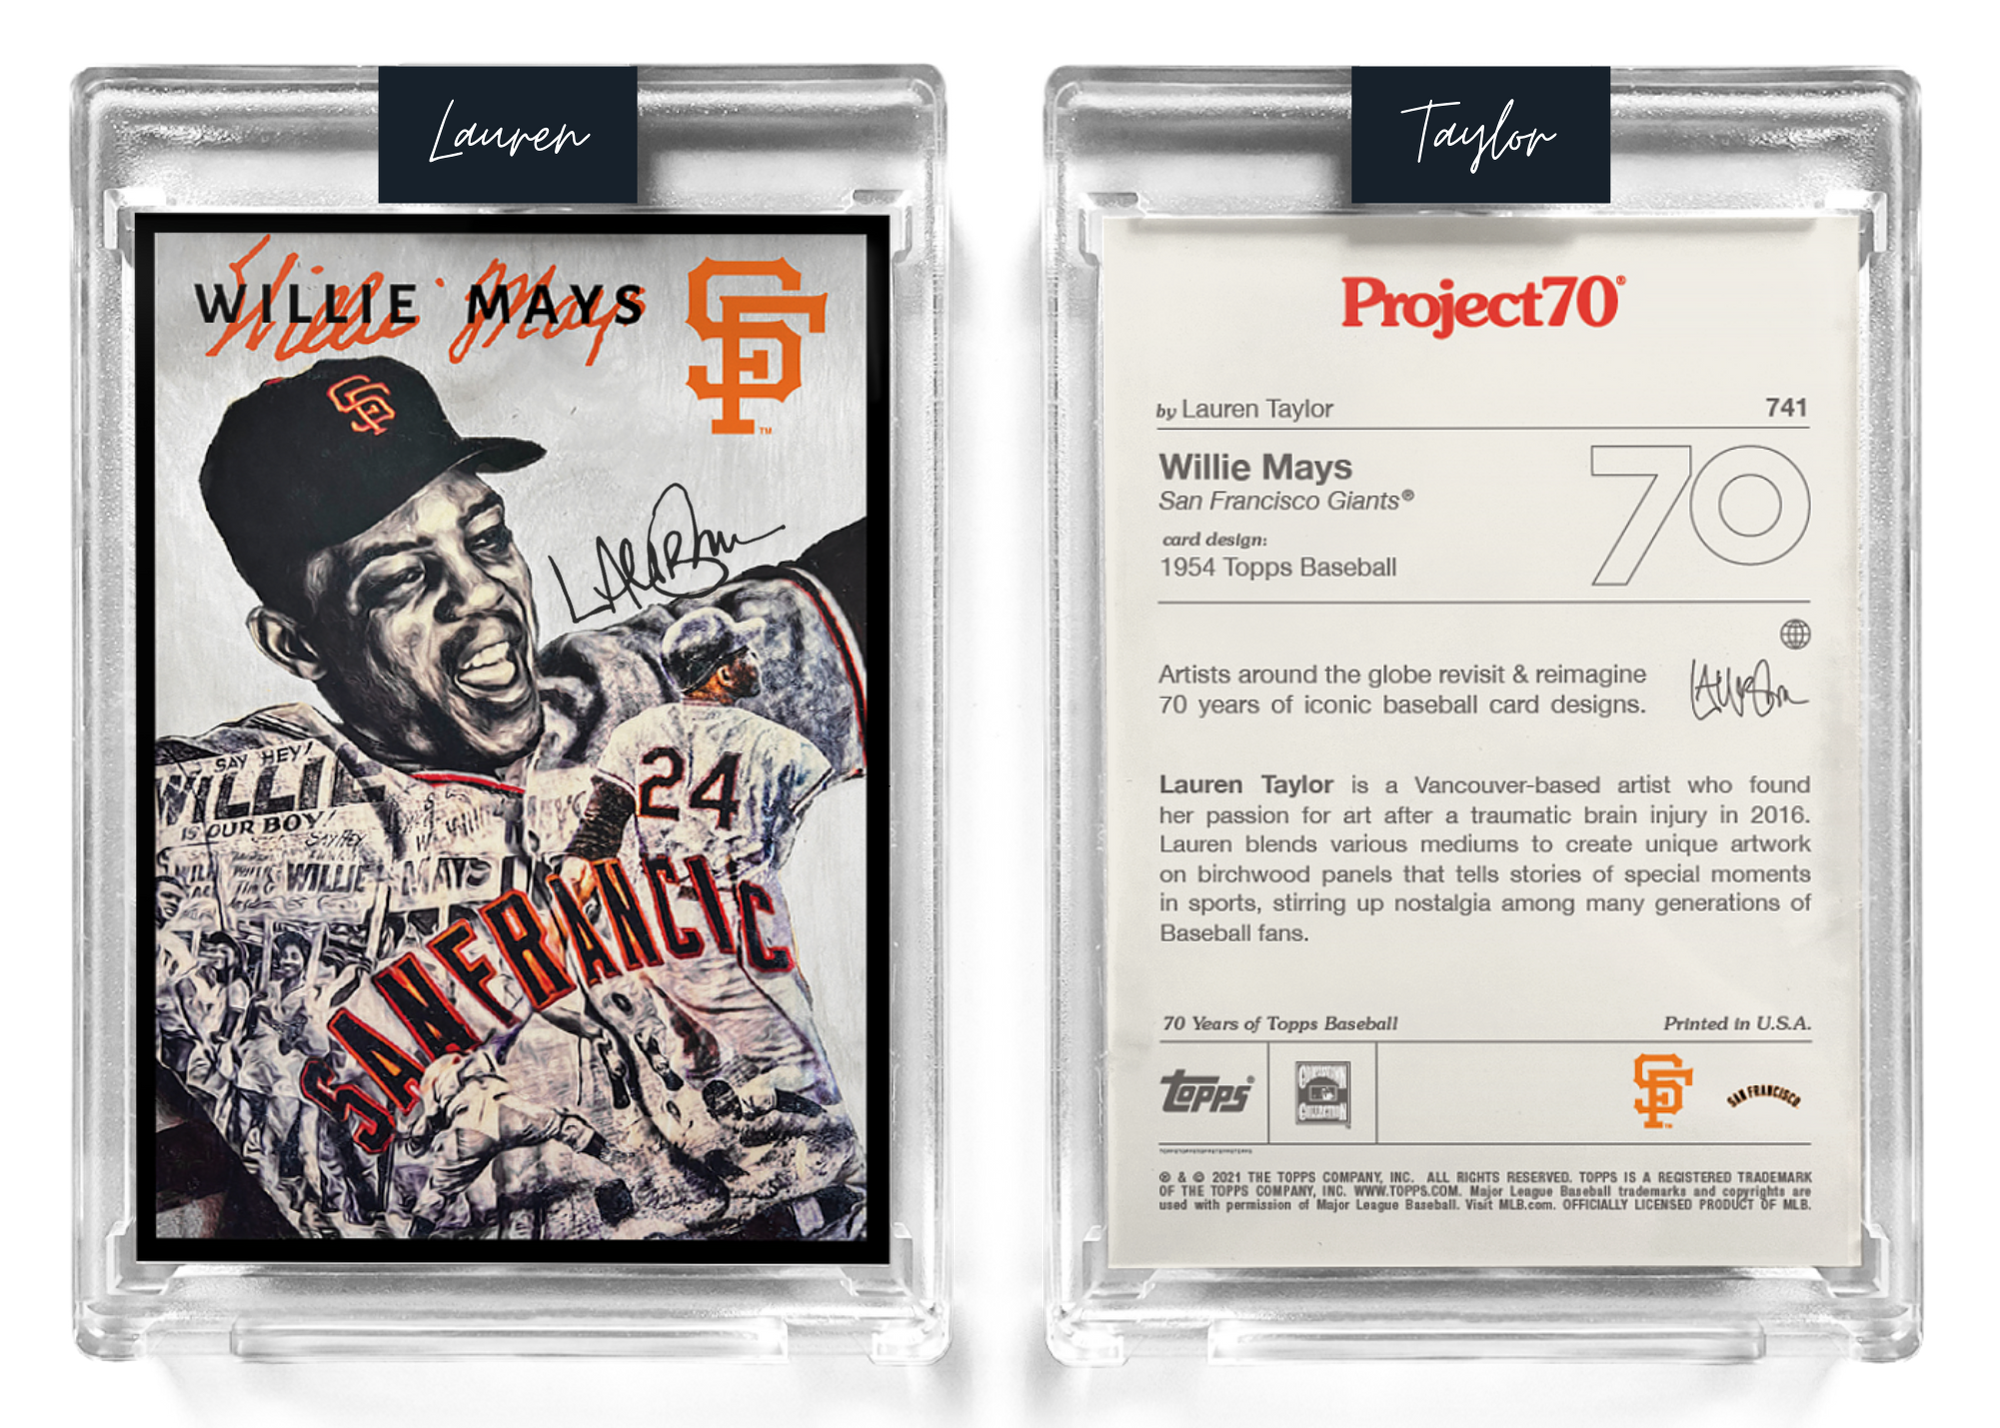 Black Artist Signature - Topps Project 70 130pt card #741 by Lauren Taylor - Willie Mays